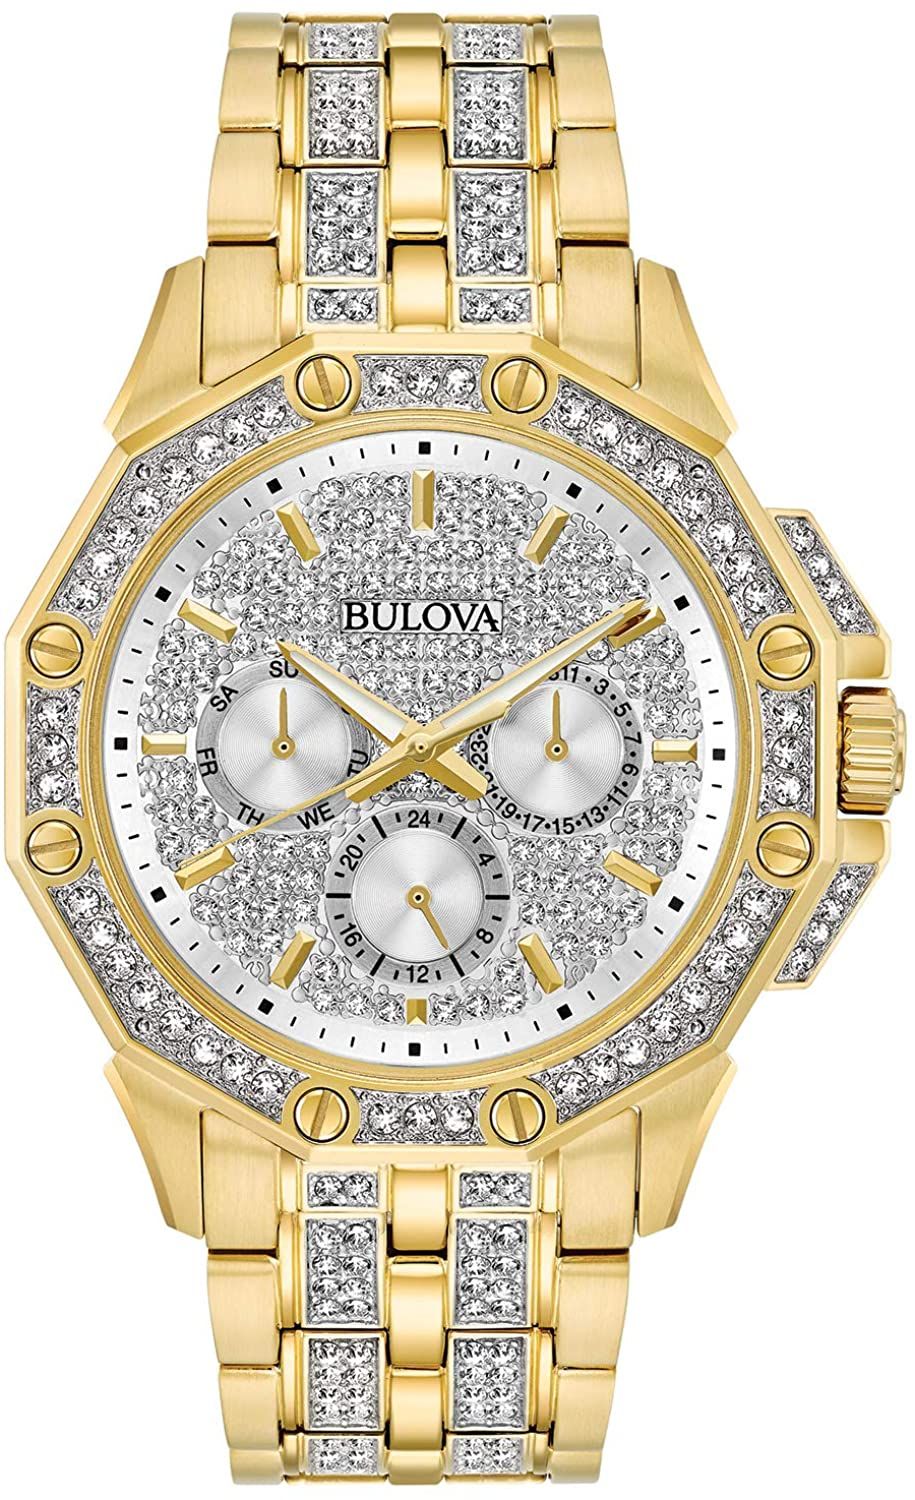 This Bulova Crystal Octava Multi Dial Watch for Men is the perfect timepiece to wear or to gift. It's Gold 41 mm Round case combined with the comfortable Gold Stainless steel will ensure you enjoy this stunning timepiece without any compromise. Operated by a high quality Quartz movement and water resistant to 3 bars, your watch will keep ticking. This high quality watch is embellished with 308 crystals on the bezel -The watch has a calendar function: Day-Date, 24-hour Display, Luminous Hands High quality 21 cm length and 21 mm width Gold Stainless steel strap with a Deployment clasp Case diameter: 41 mm,case thickness: 11 mm, case colour: Gold and dial colour: Silver